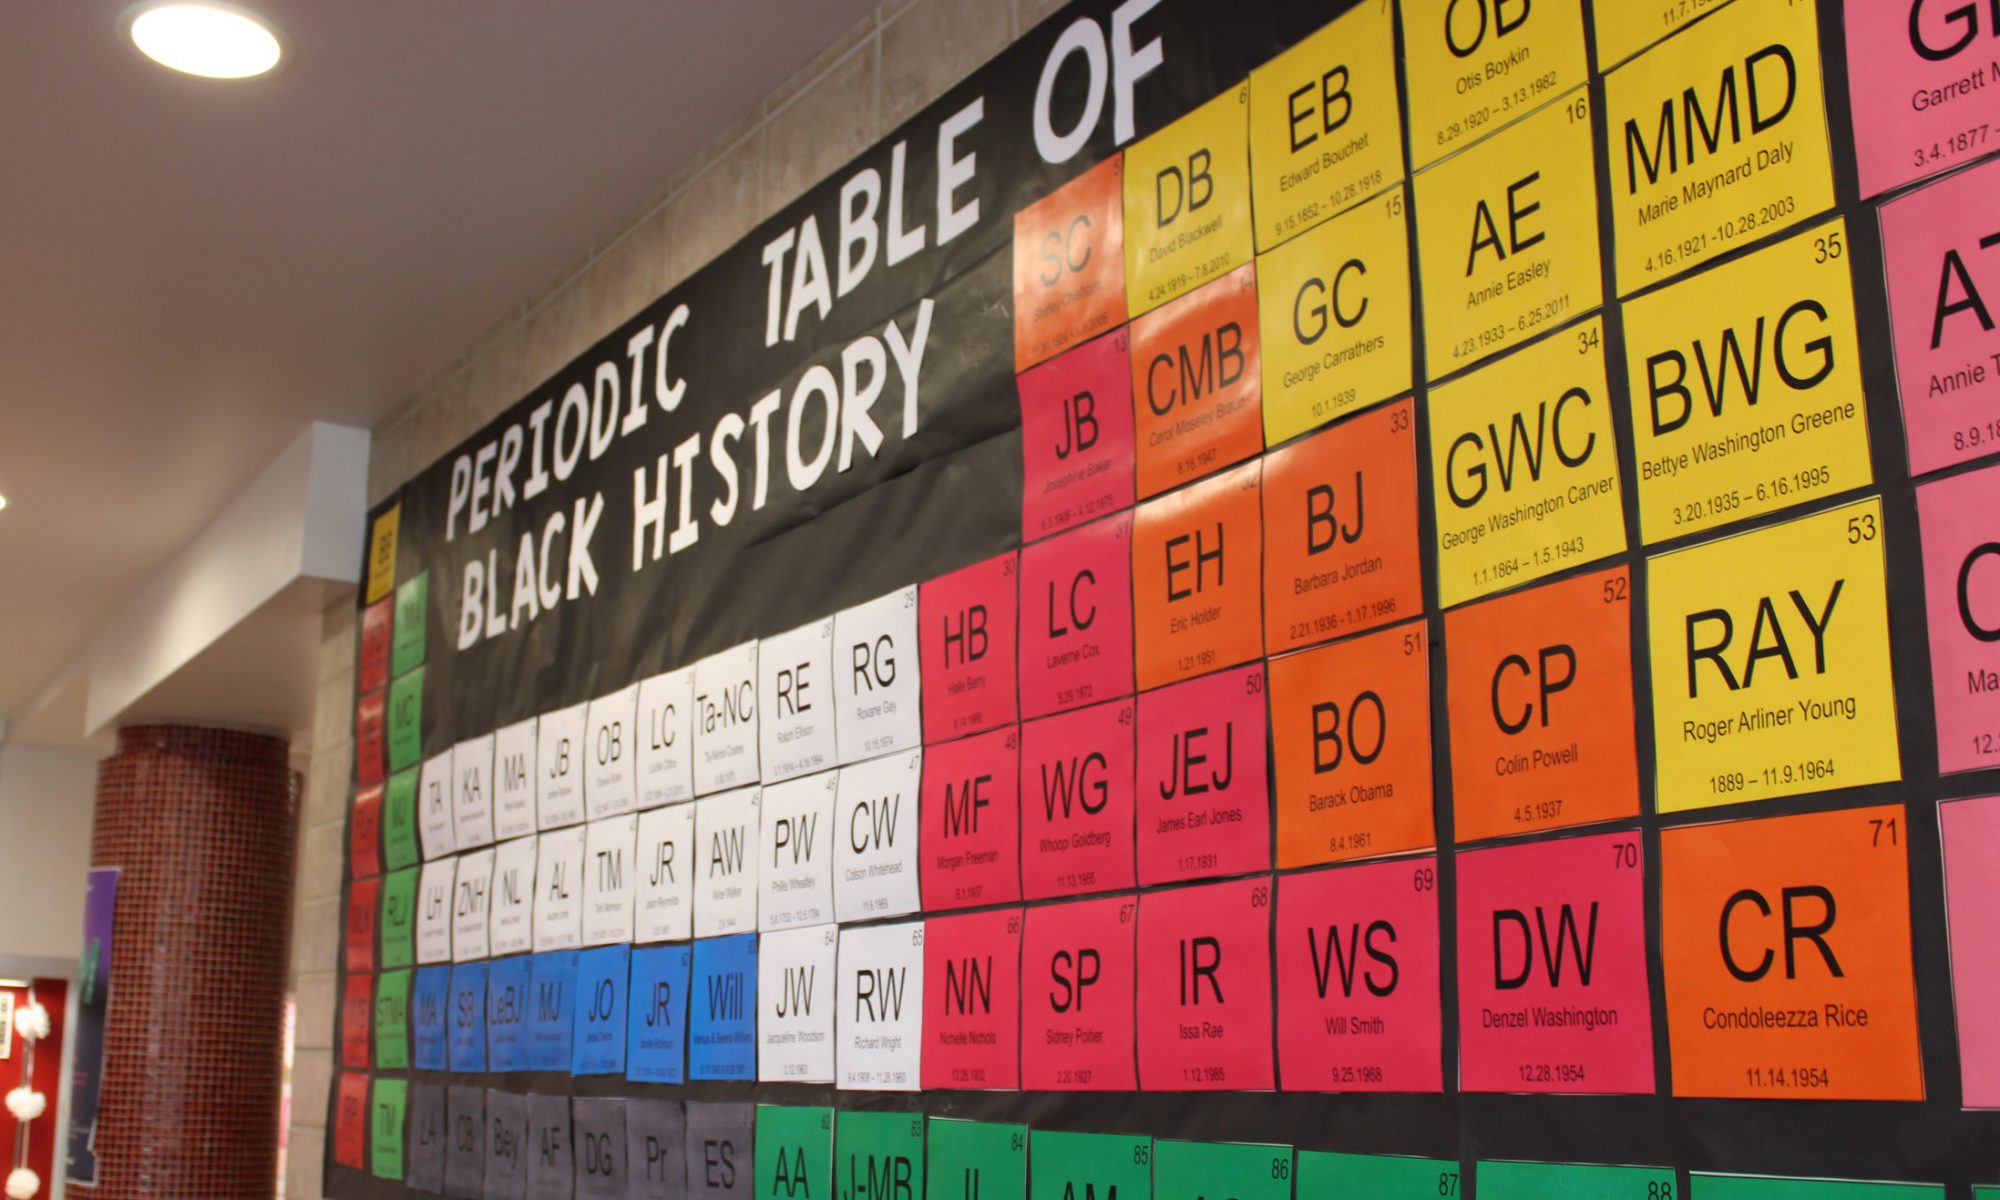 Periodic Table of Black History display